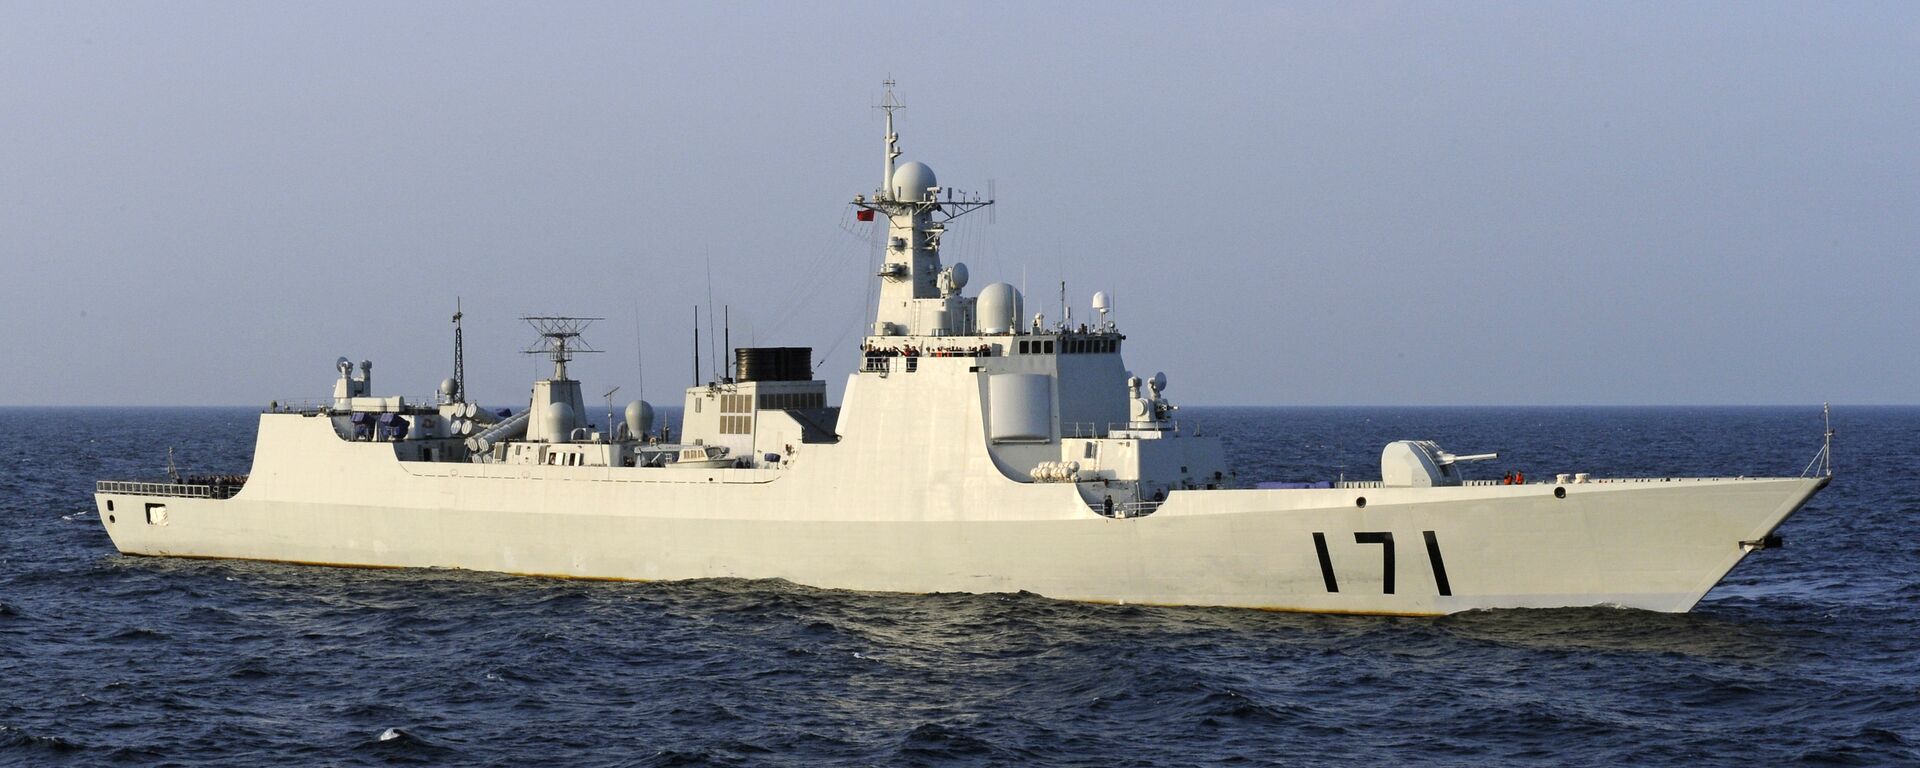 Chinese navy warship, the DDG-171 Haikou destroyer, patrols the waters of the Gulf of Aden (file photo) - Sputnik International, 1920, 01.05.2020